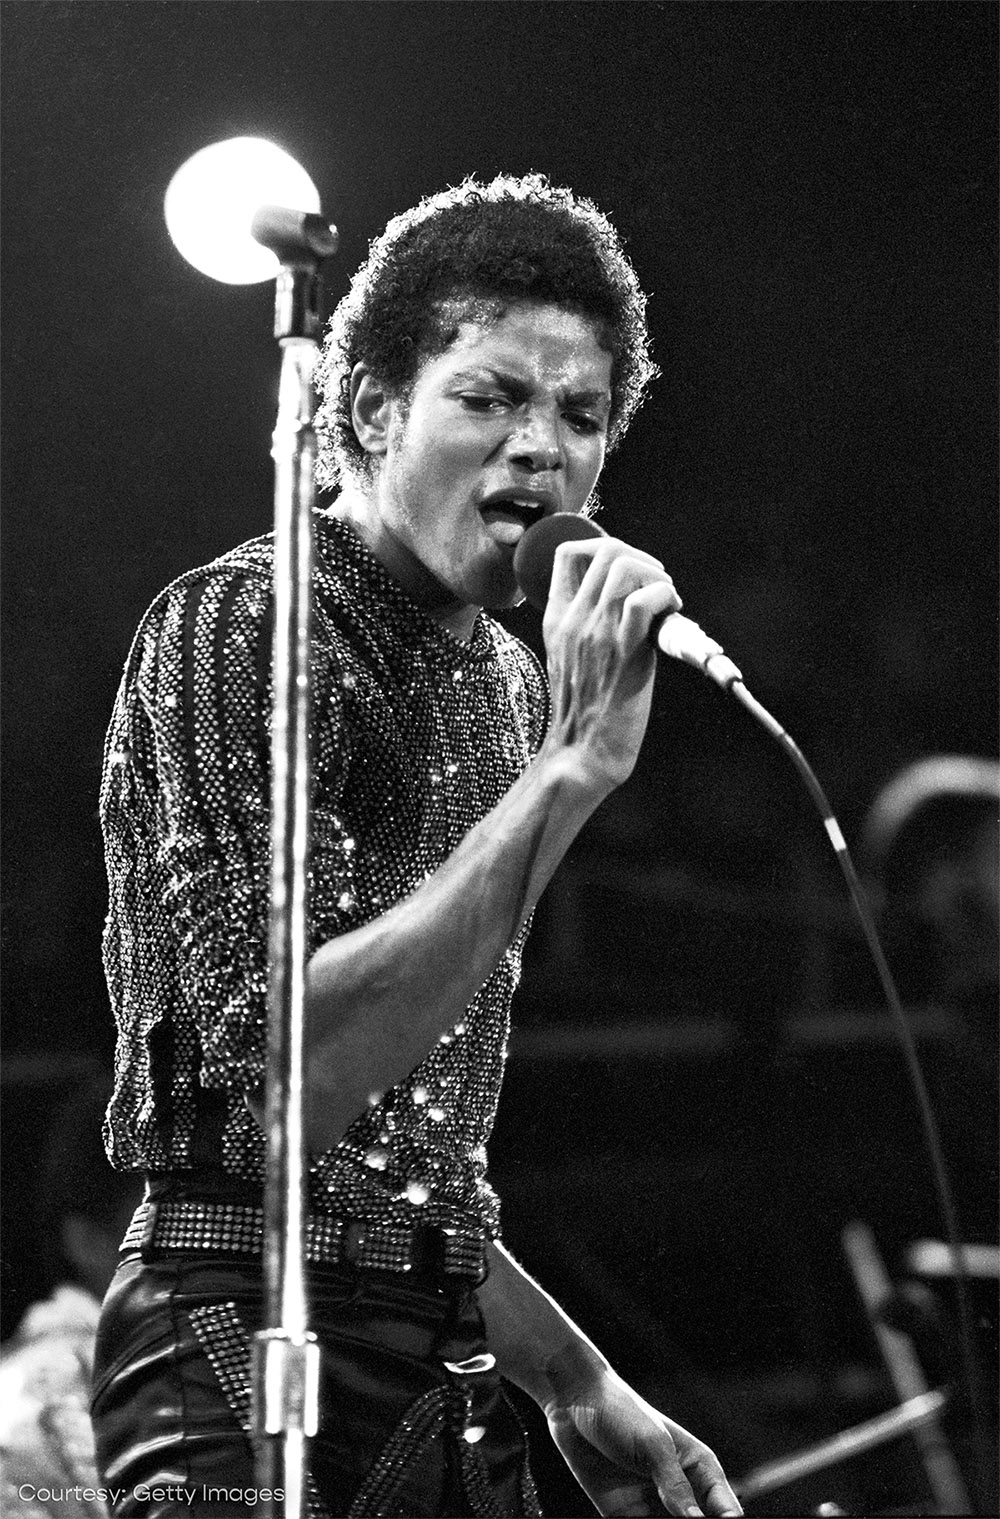 Michael Jackson performs in concert in 1980s.